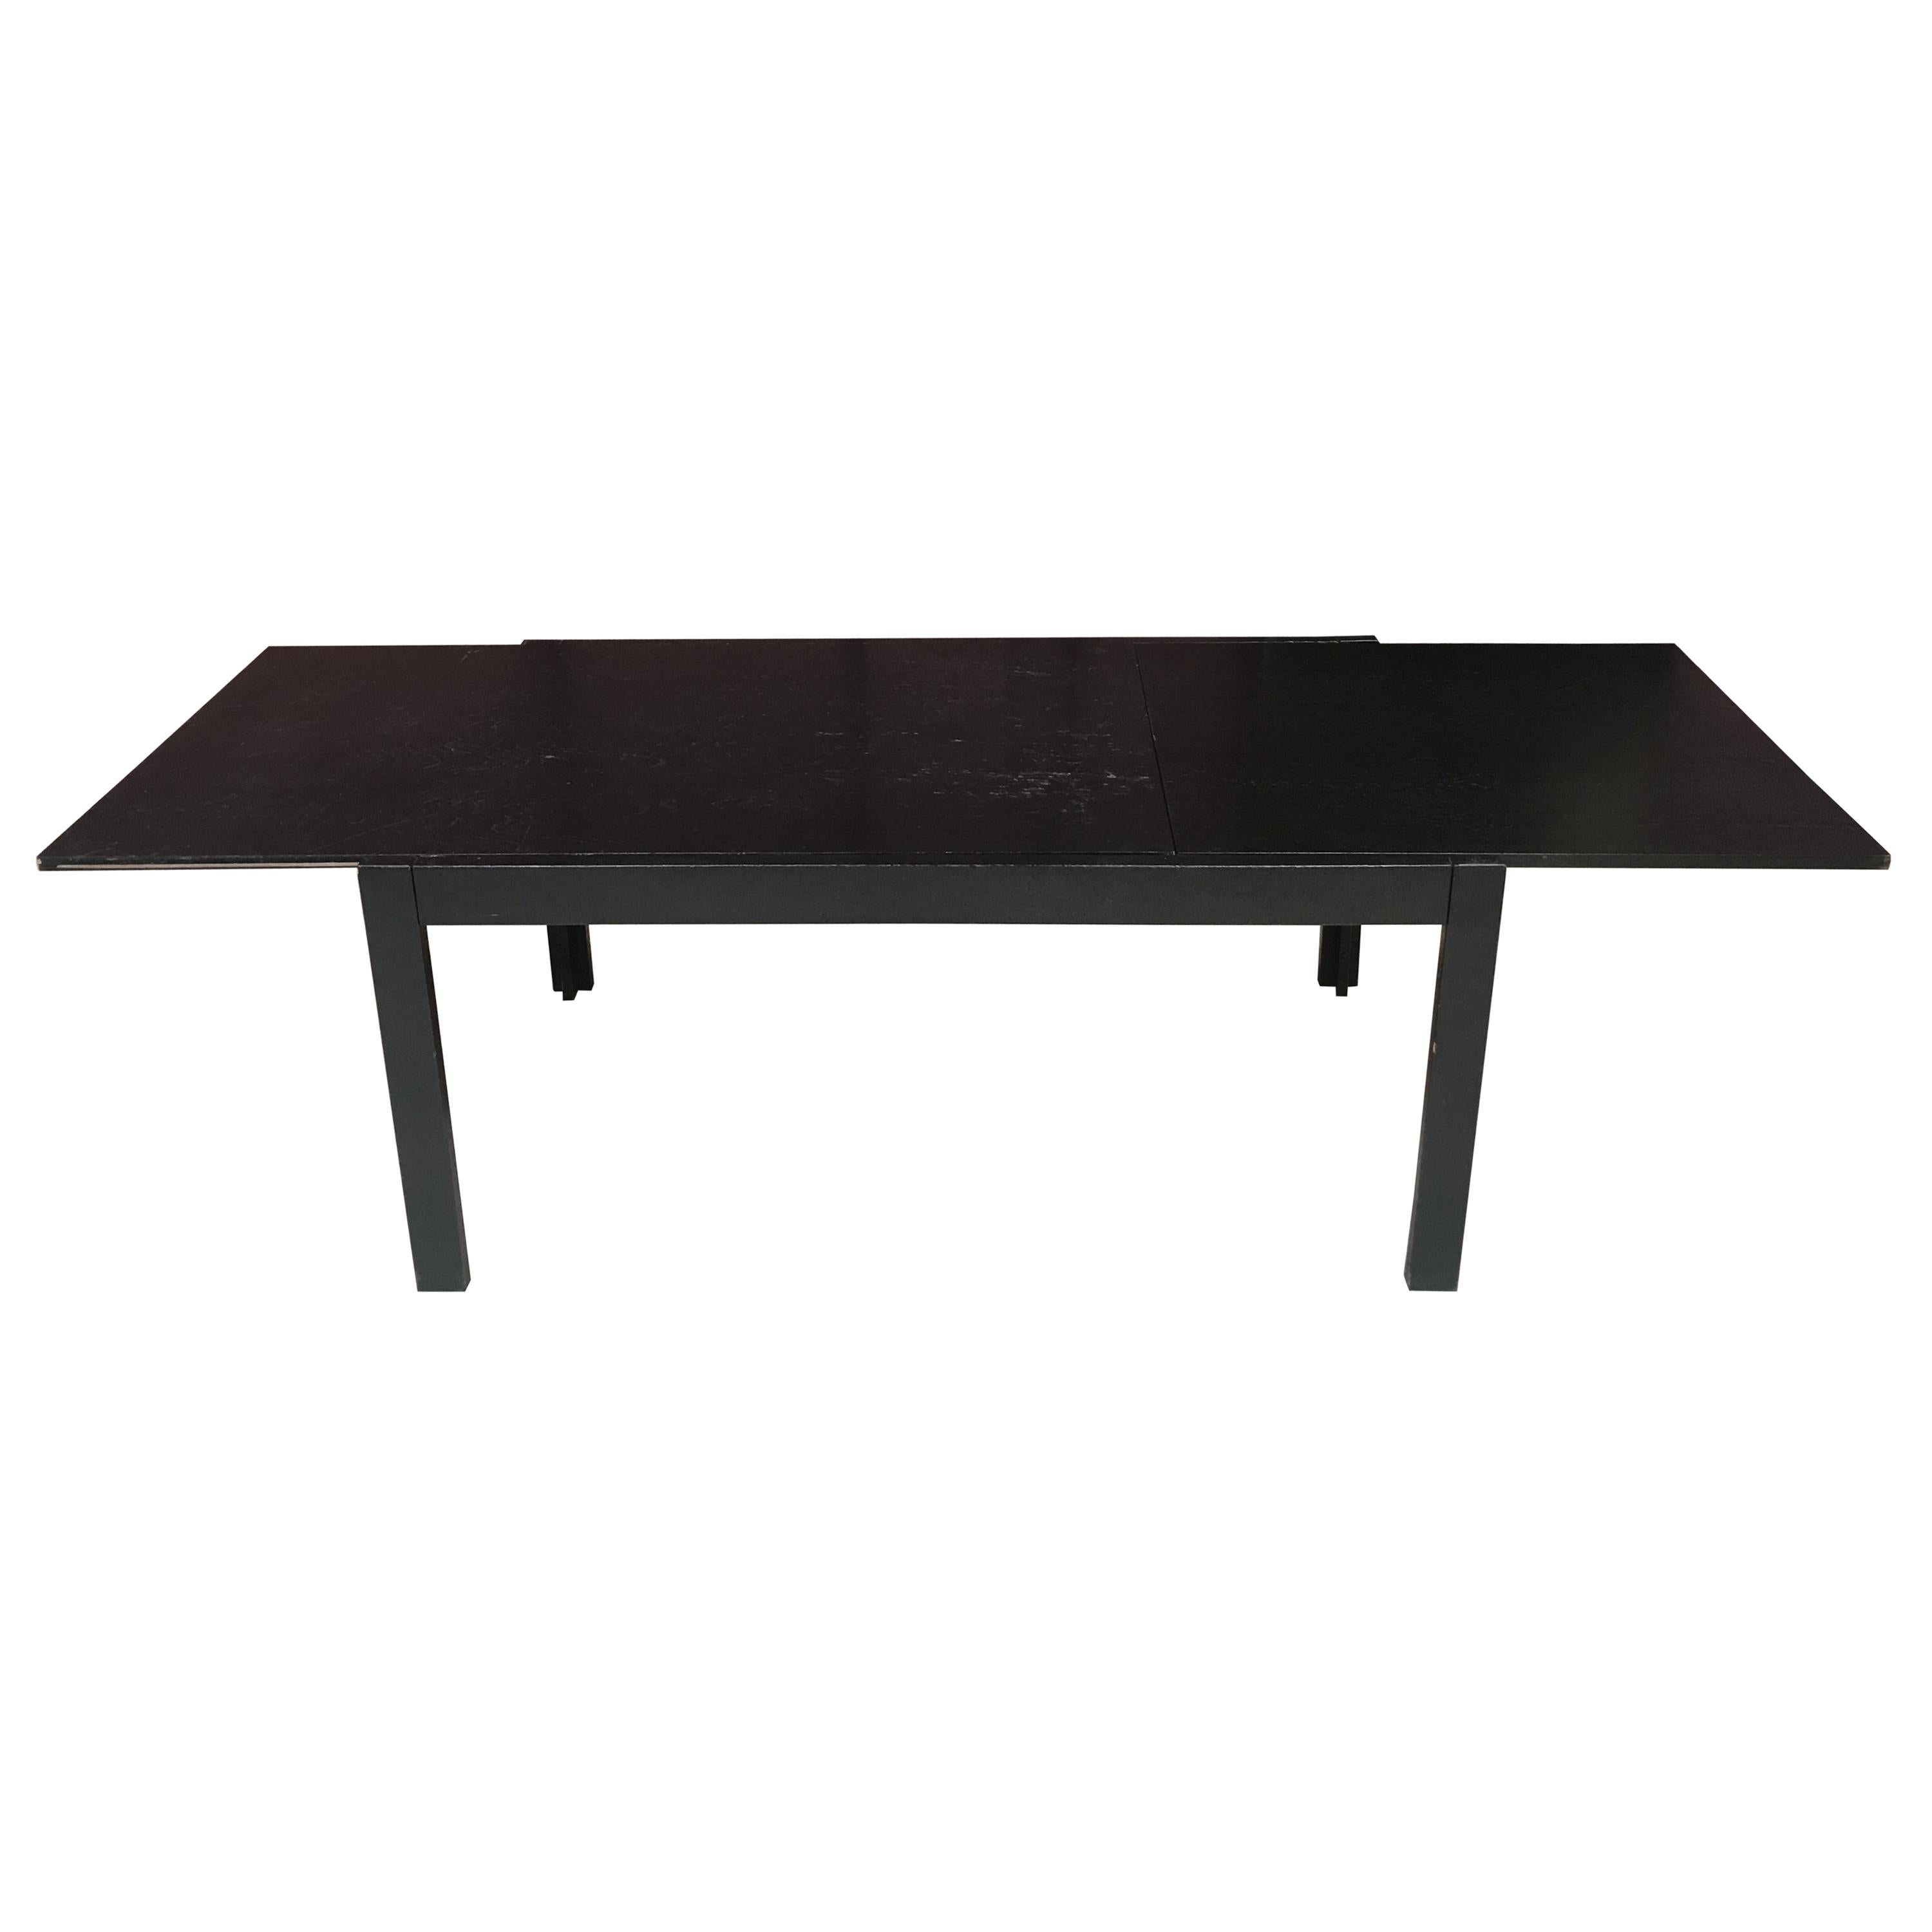 Brutalist Table in Blackened Wood, circa 1960-1970 For Sale